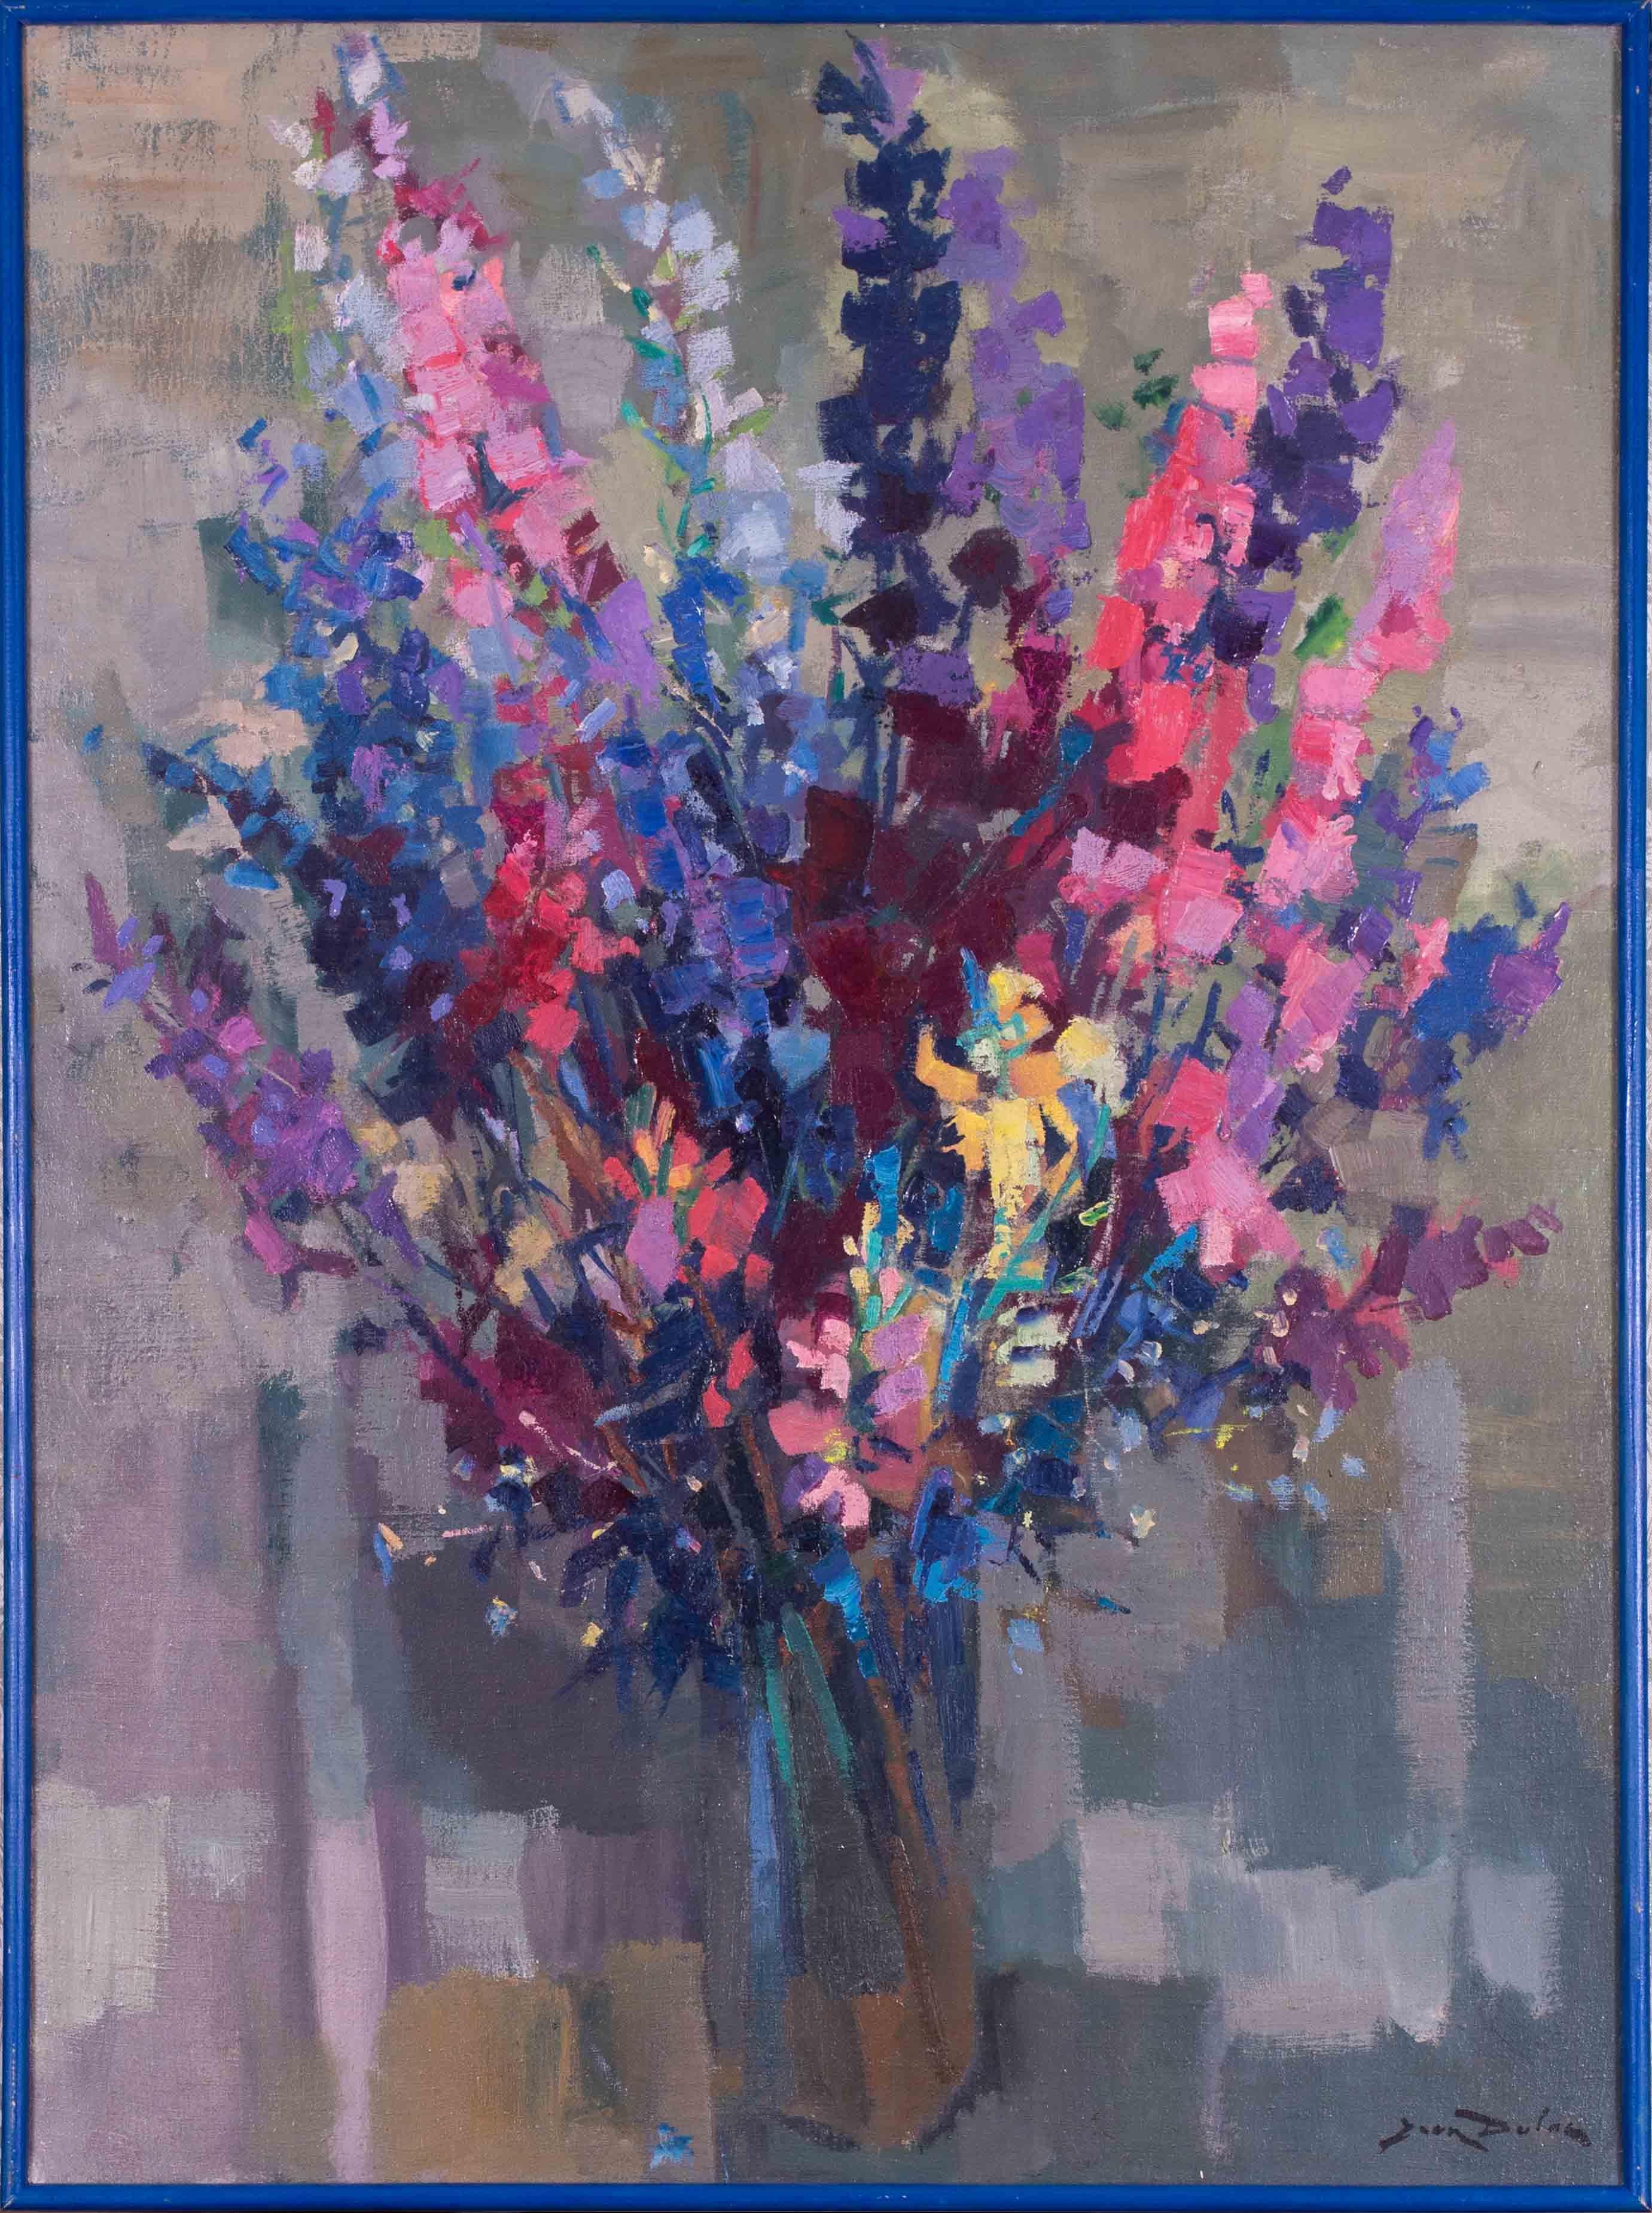 1965 Post Impressionist French still life painting of blue and pink wallflowers